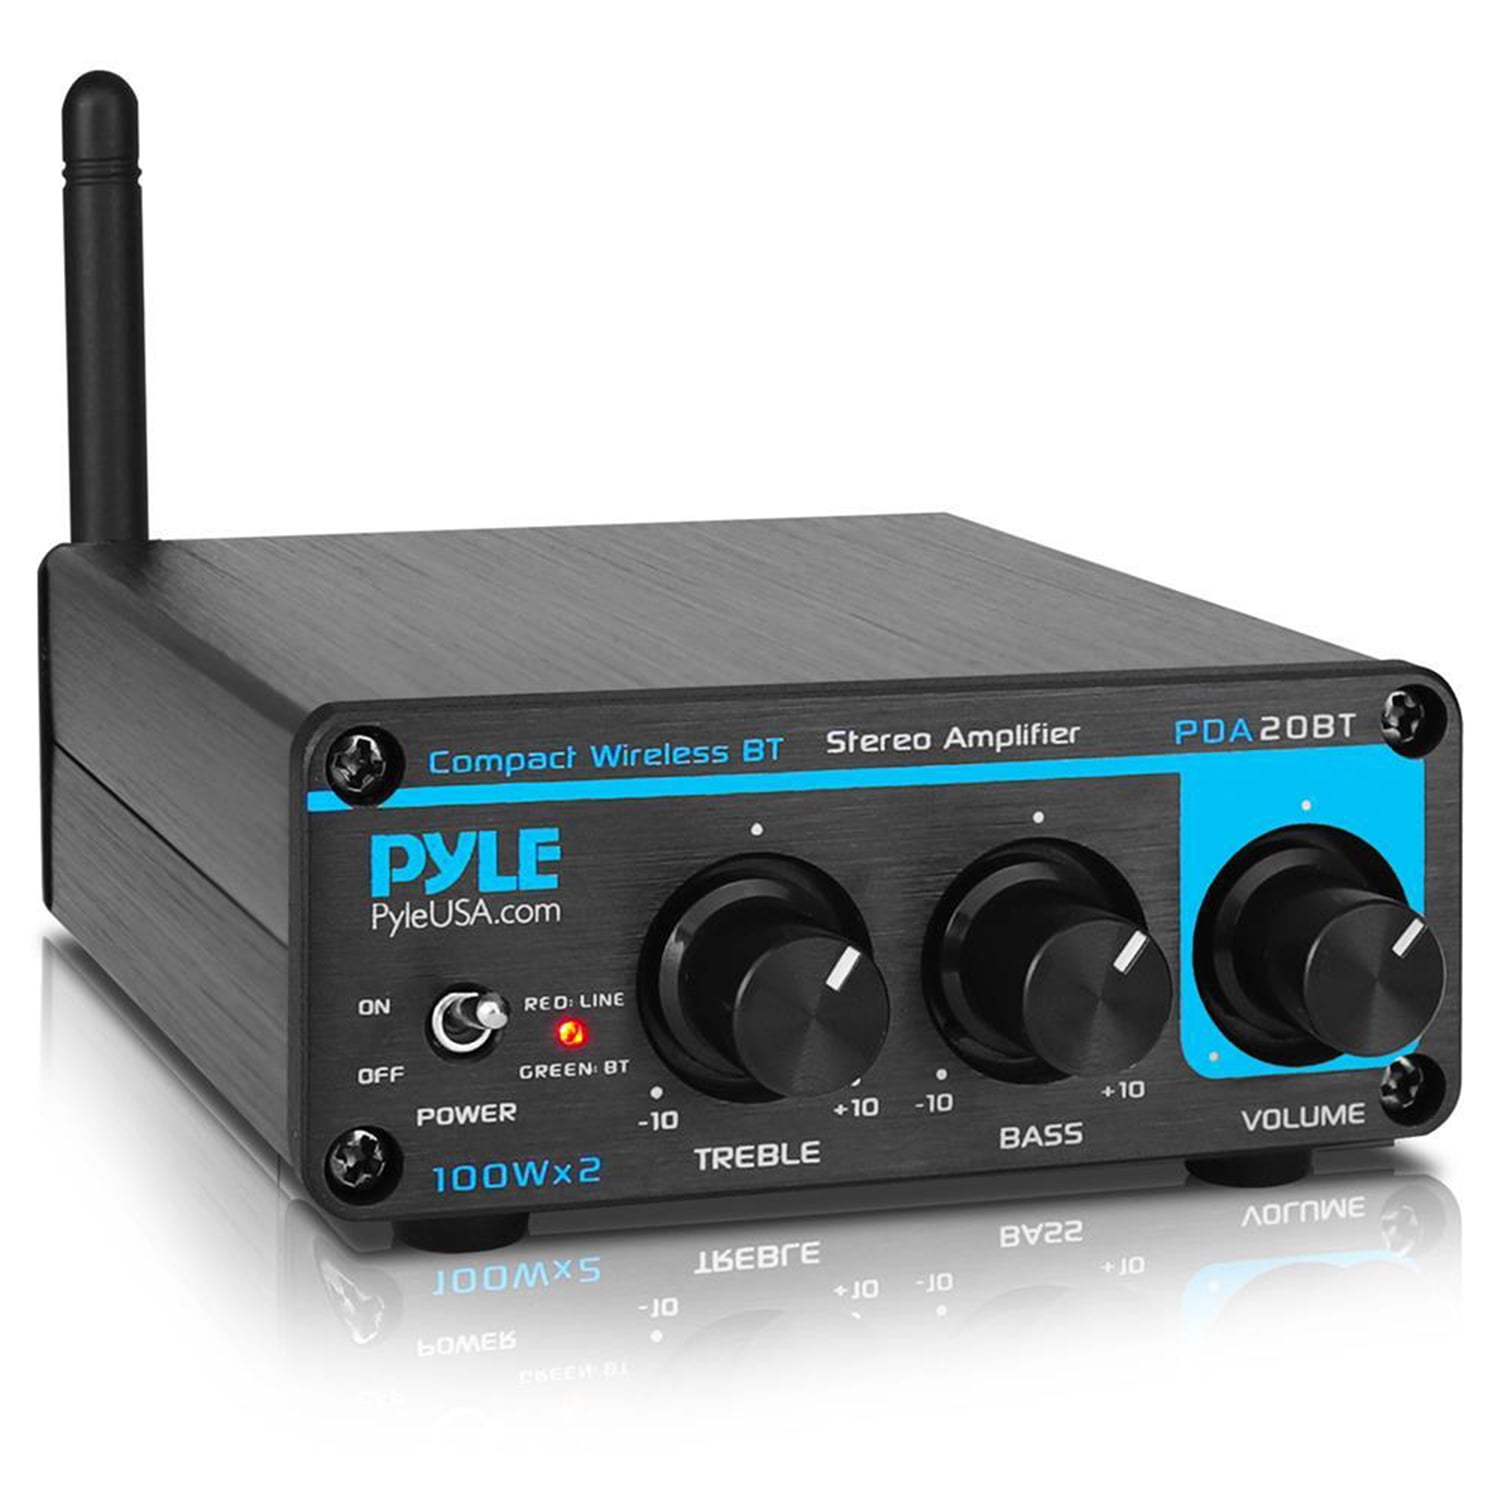 Compact Desktop Home Theater Stereo Amplifier Receiver with USB Charge Port | Pyle PTA22BT Pager & Mixer Karaoke Modes Mic Input Bluetooth Mini Blue Series Home Audio Amplifier 40 Watt x 2 